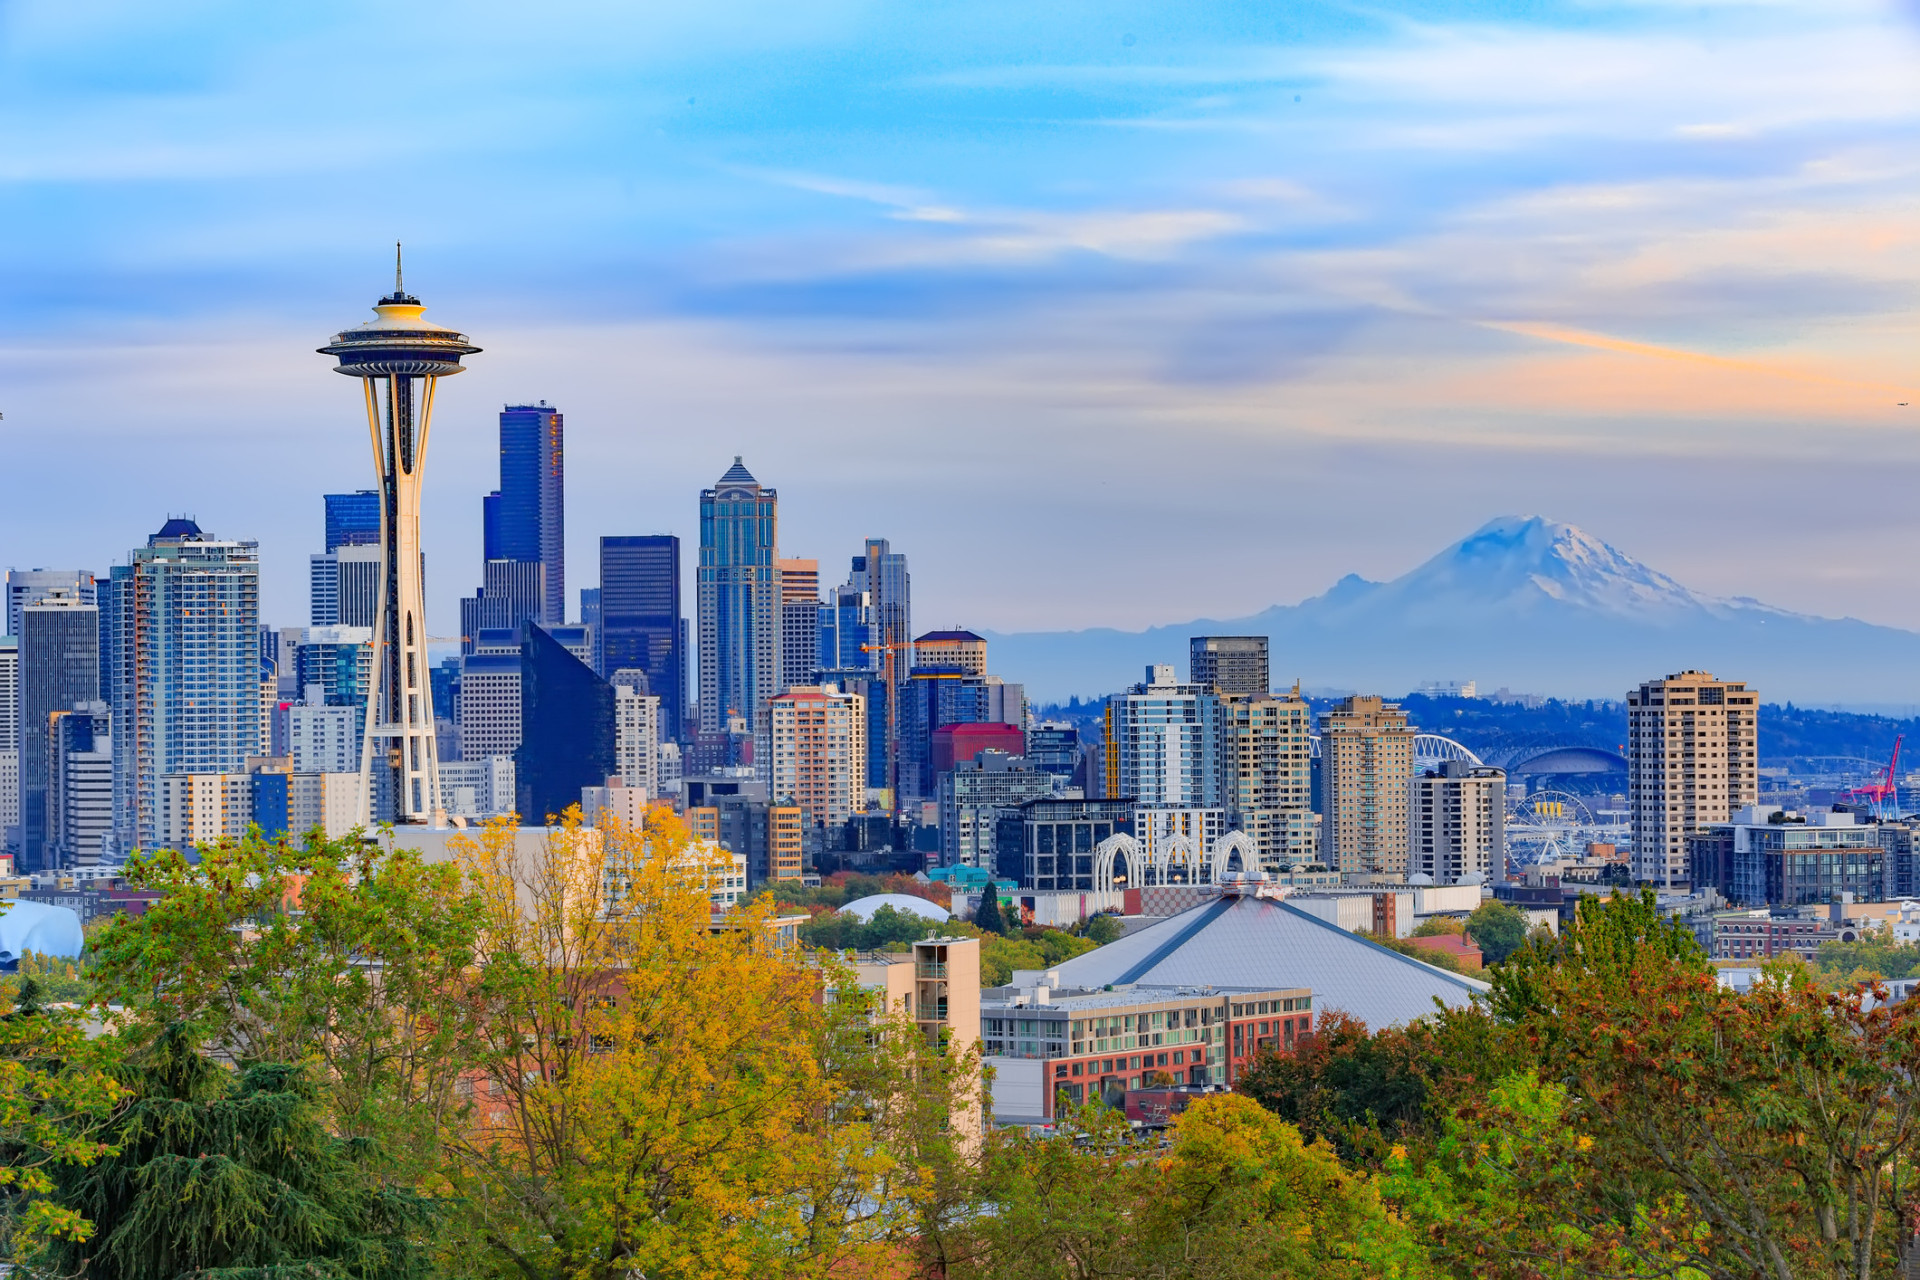 Vibrant Seattle offers not only beautiful scenery but also a vast array of activities and places to visit, such as the iconic Space Needle and the bustling Pike Place Market.<p>You may also like:<a href="https://www.starsinsider.com/n/363655?utm_source=msn.com&utm_medium=display&utm_campaign=referral_description&utm_content=284295v5en-nz"> Incredible mistakes in film and TV</a></p>